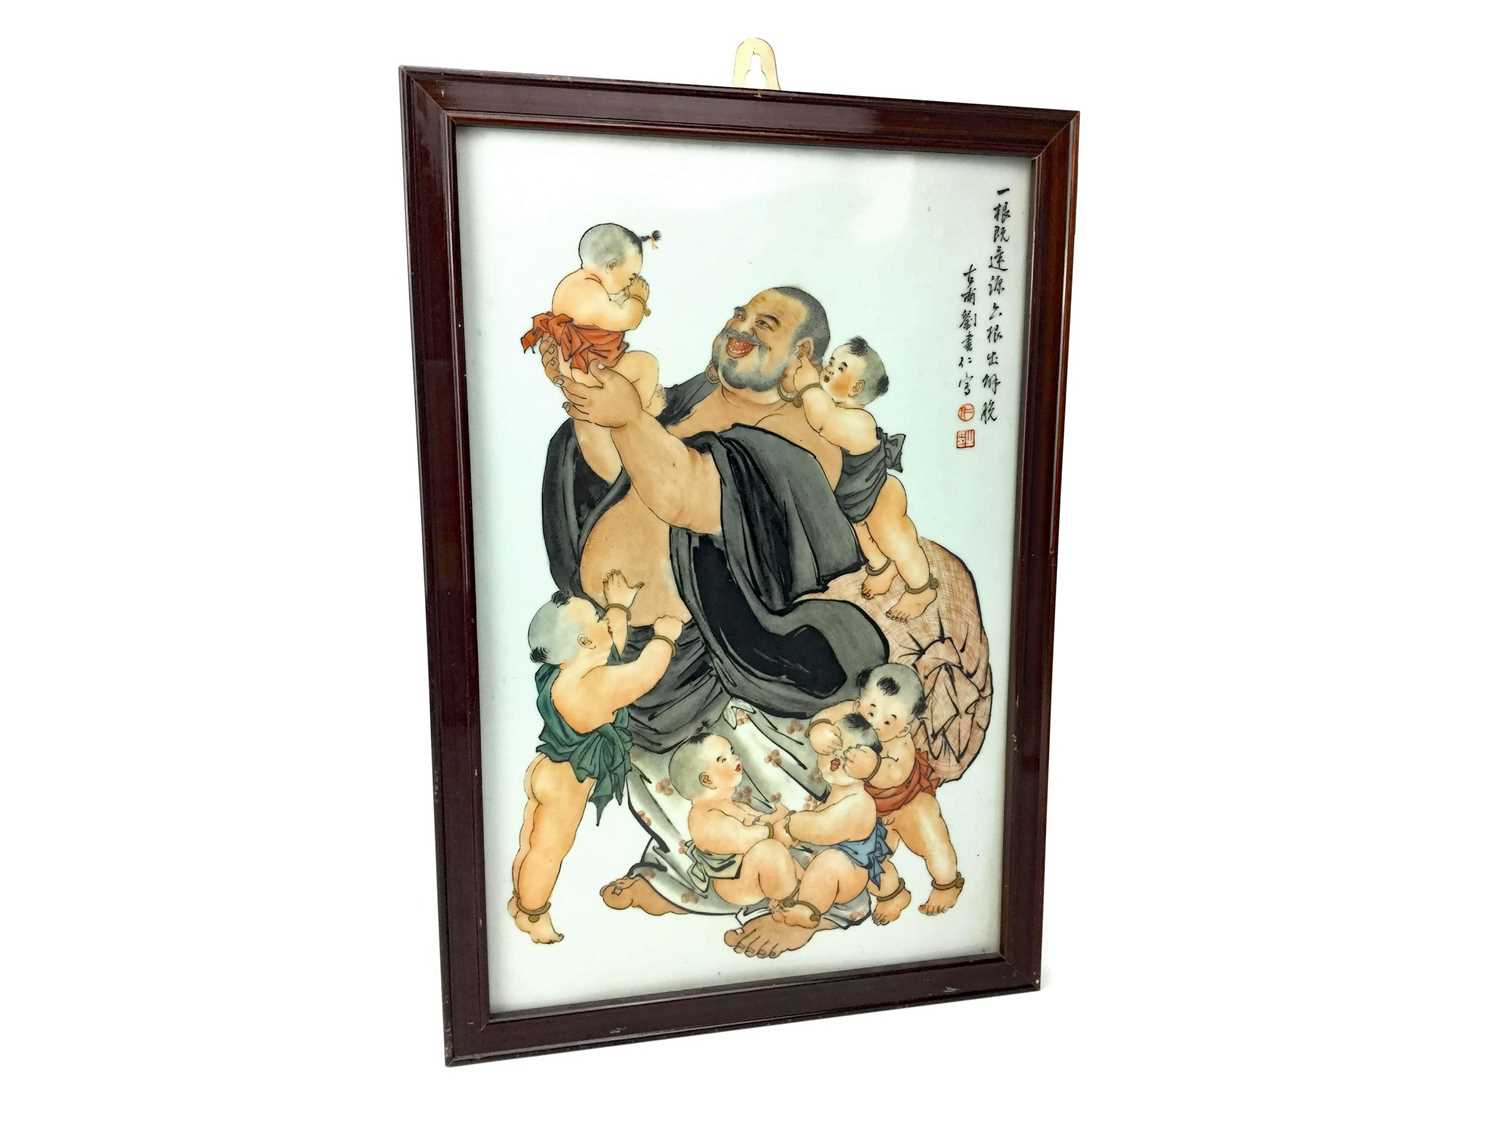 Lot 720 - A 20TH CENTURY CHINESE CERAMIC PAINTED PANEL